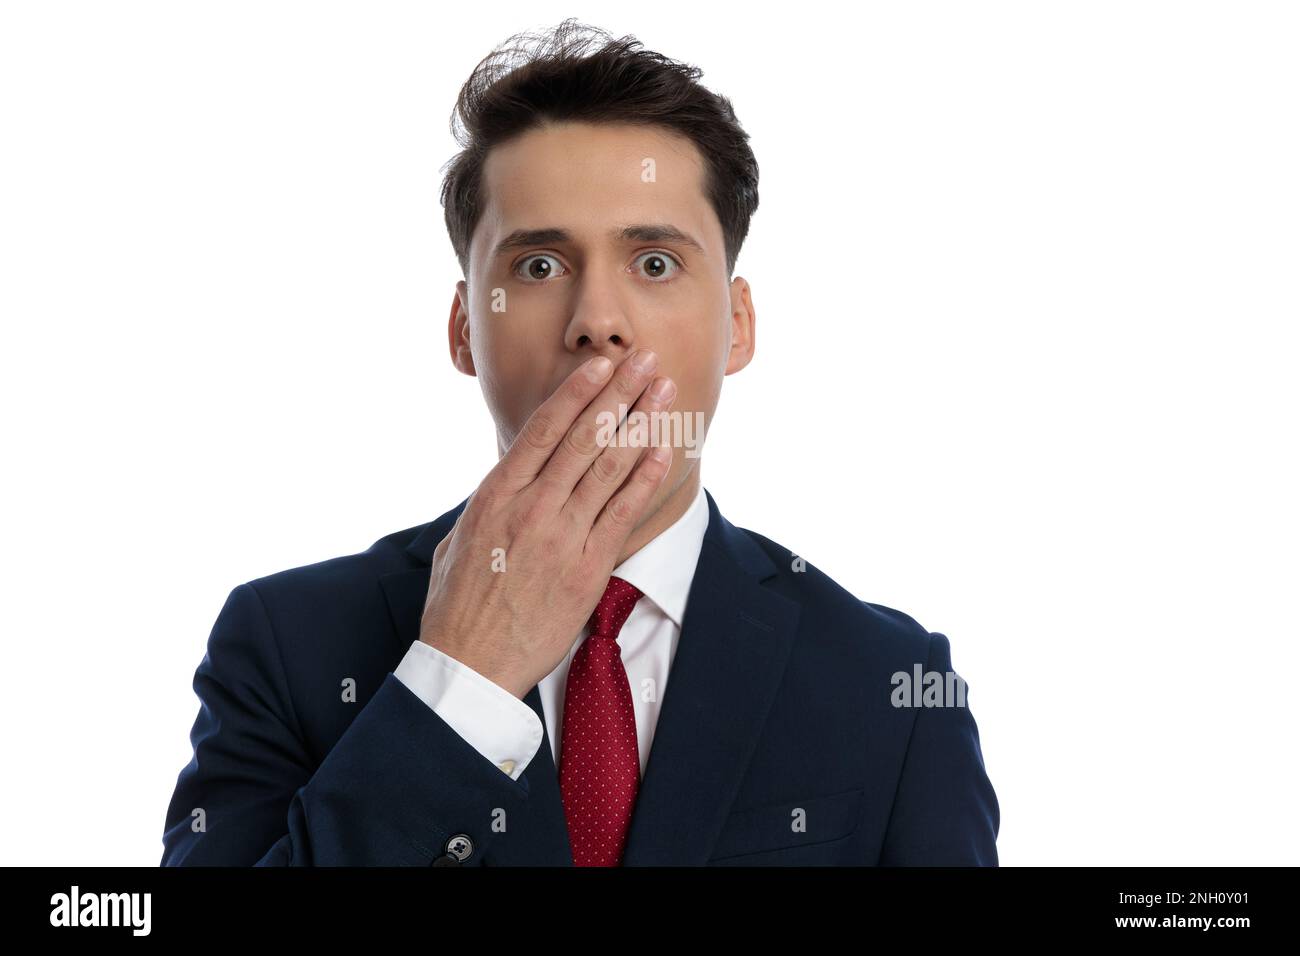 young businessman slapping his mouth and feeling shocked, wearing a suit and tie against white background Stock Photo